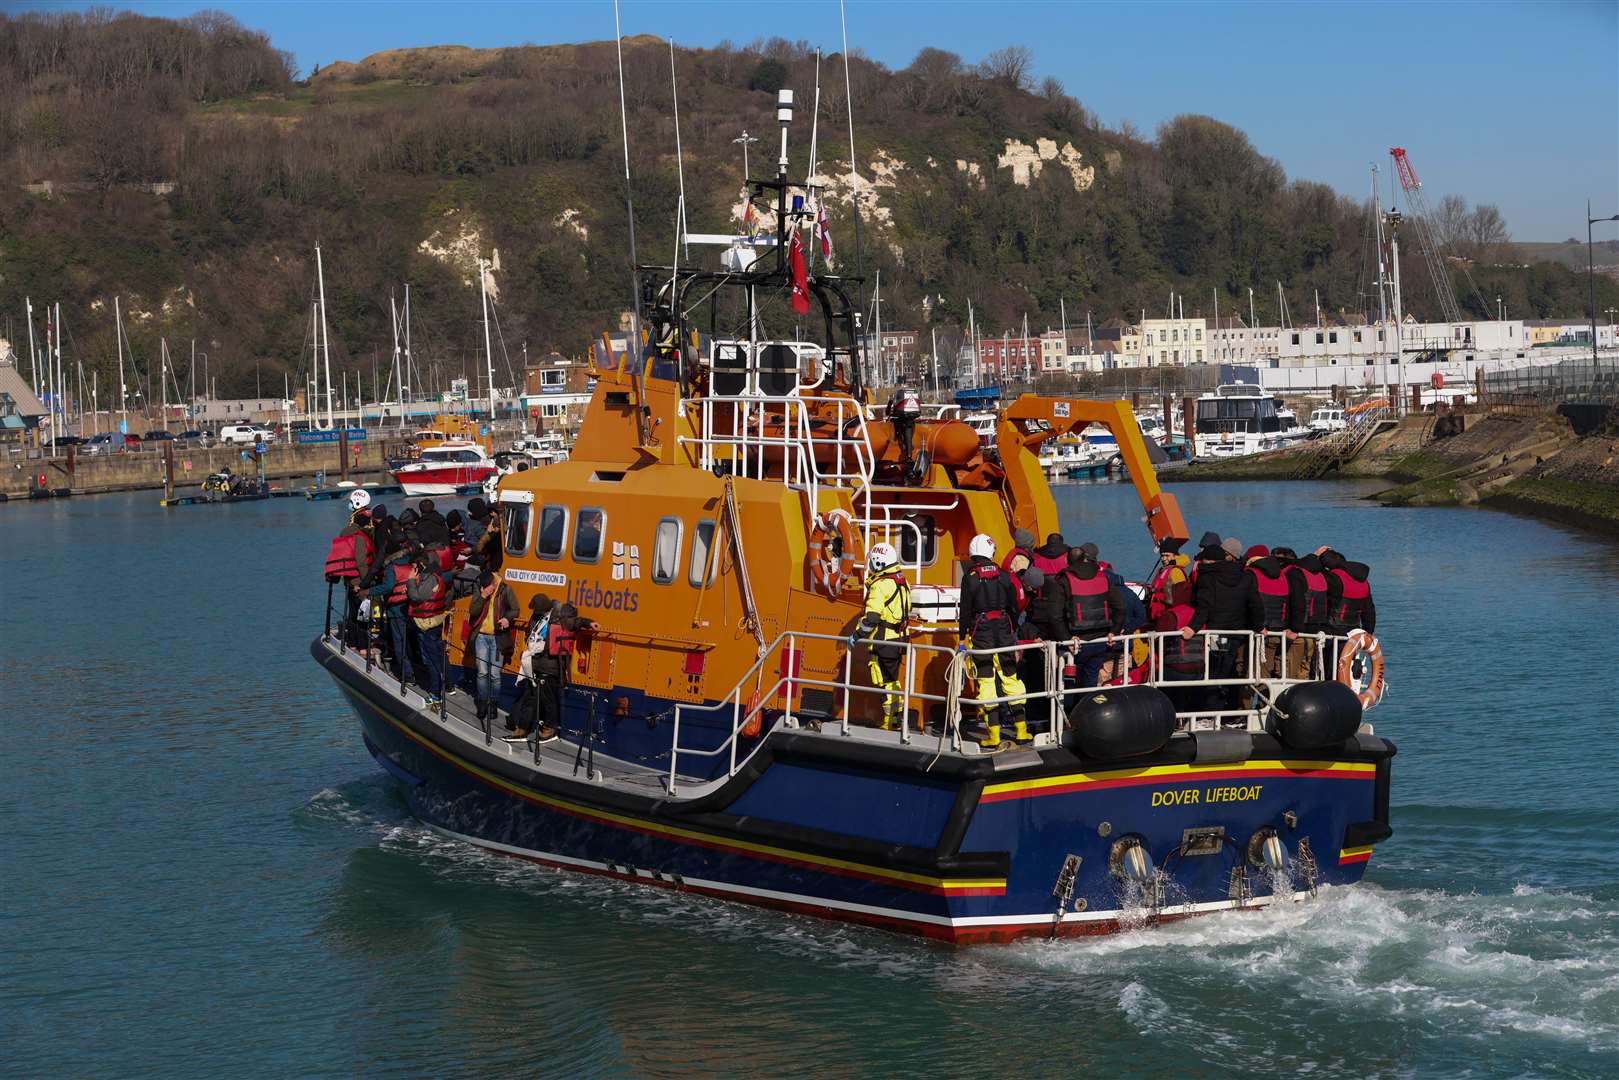 An RNLI vessel appears loaded with people at Dover. Picture: UKNIP